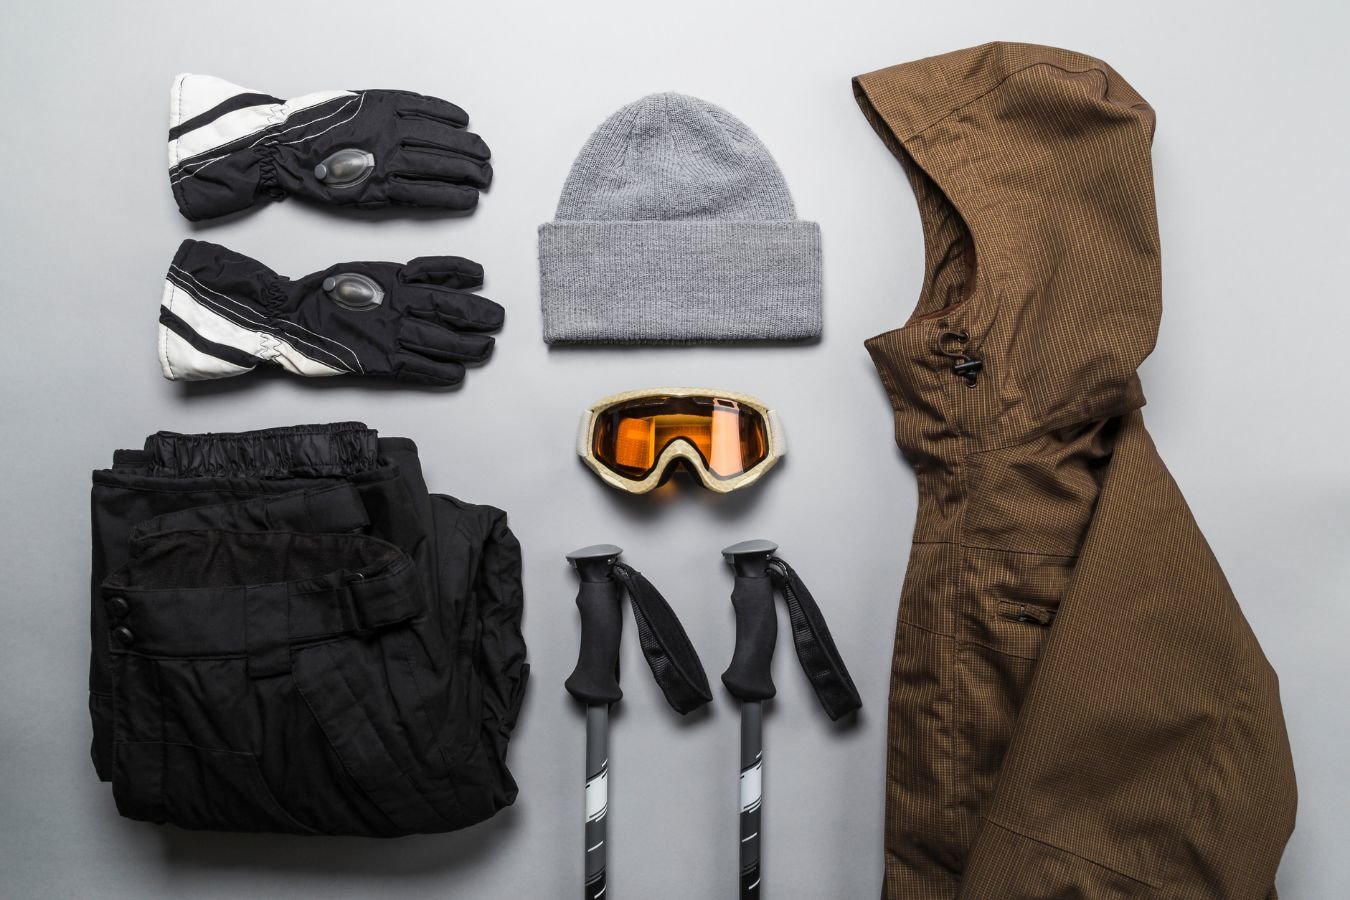 Image of what to wear alpine touring. Clothing shown includes hat, gloves, outer shell (jacket), goggles, ski poles, and snowpants.